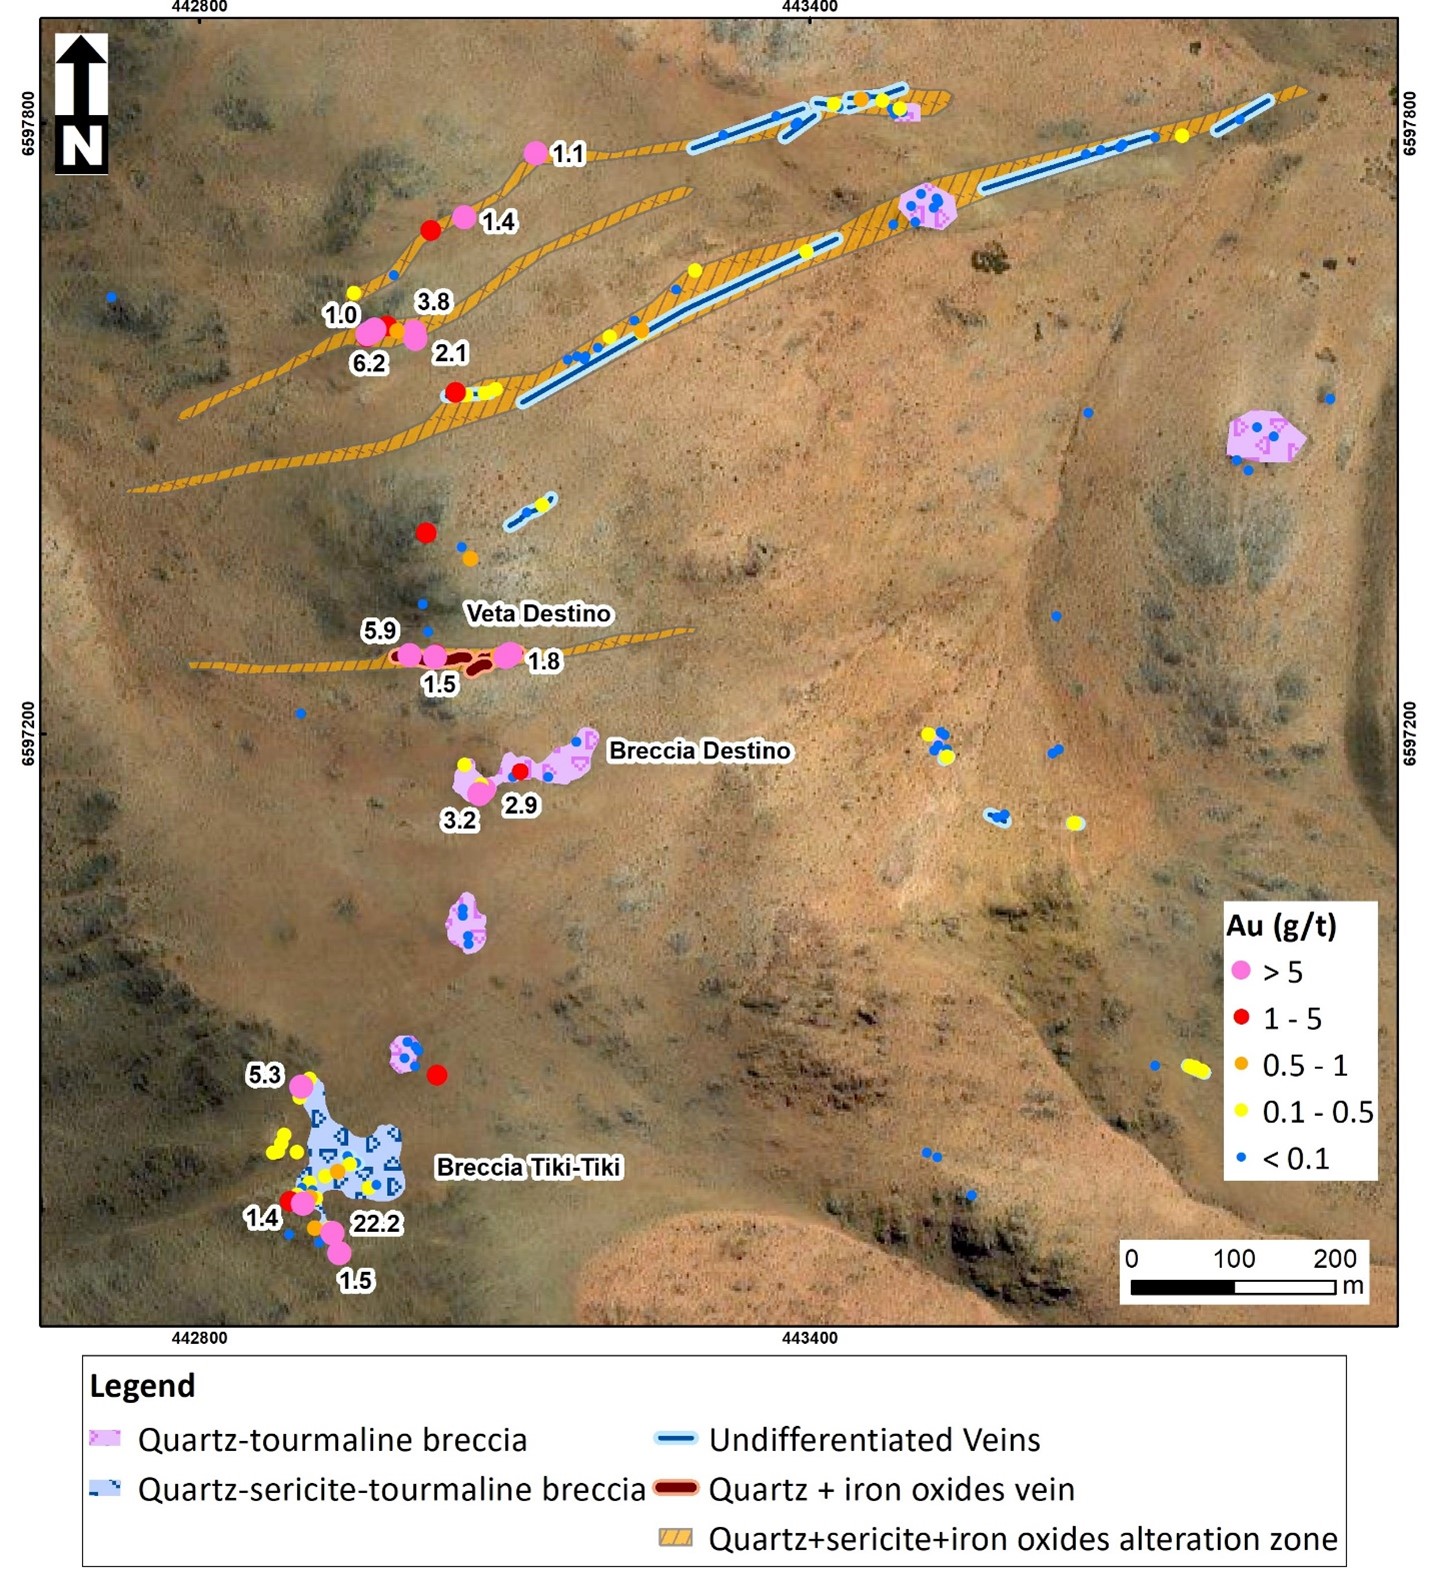 Plan map of the newly discovered Destino vein and breccia system showing distribution of gold grades in rock chip samples that returned up to 22.2 g/t Au. Gold mineralisation is hosted within both epithermal quartz veins and adjacent quartz-tourmaline breccias.